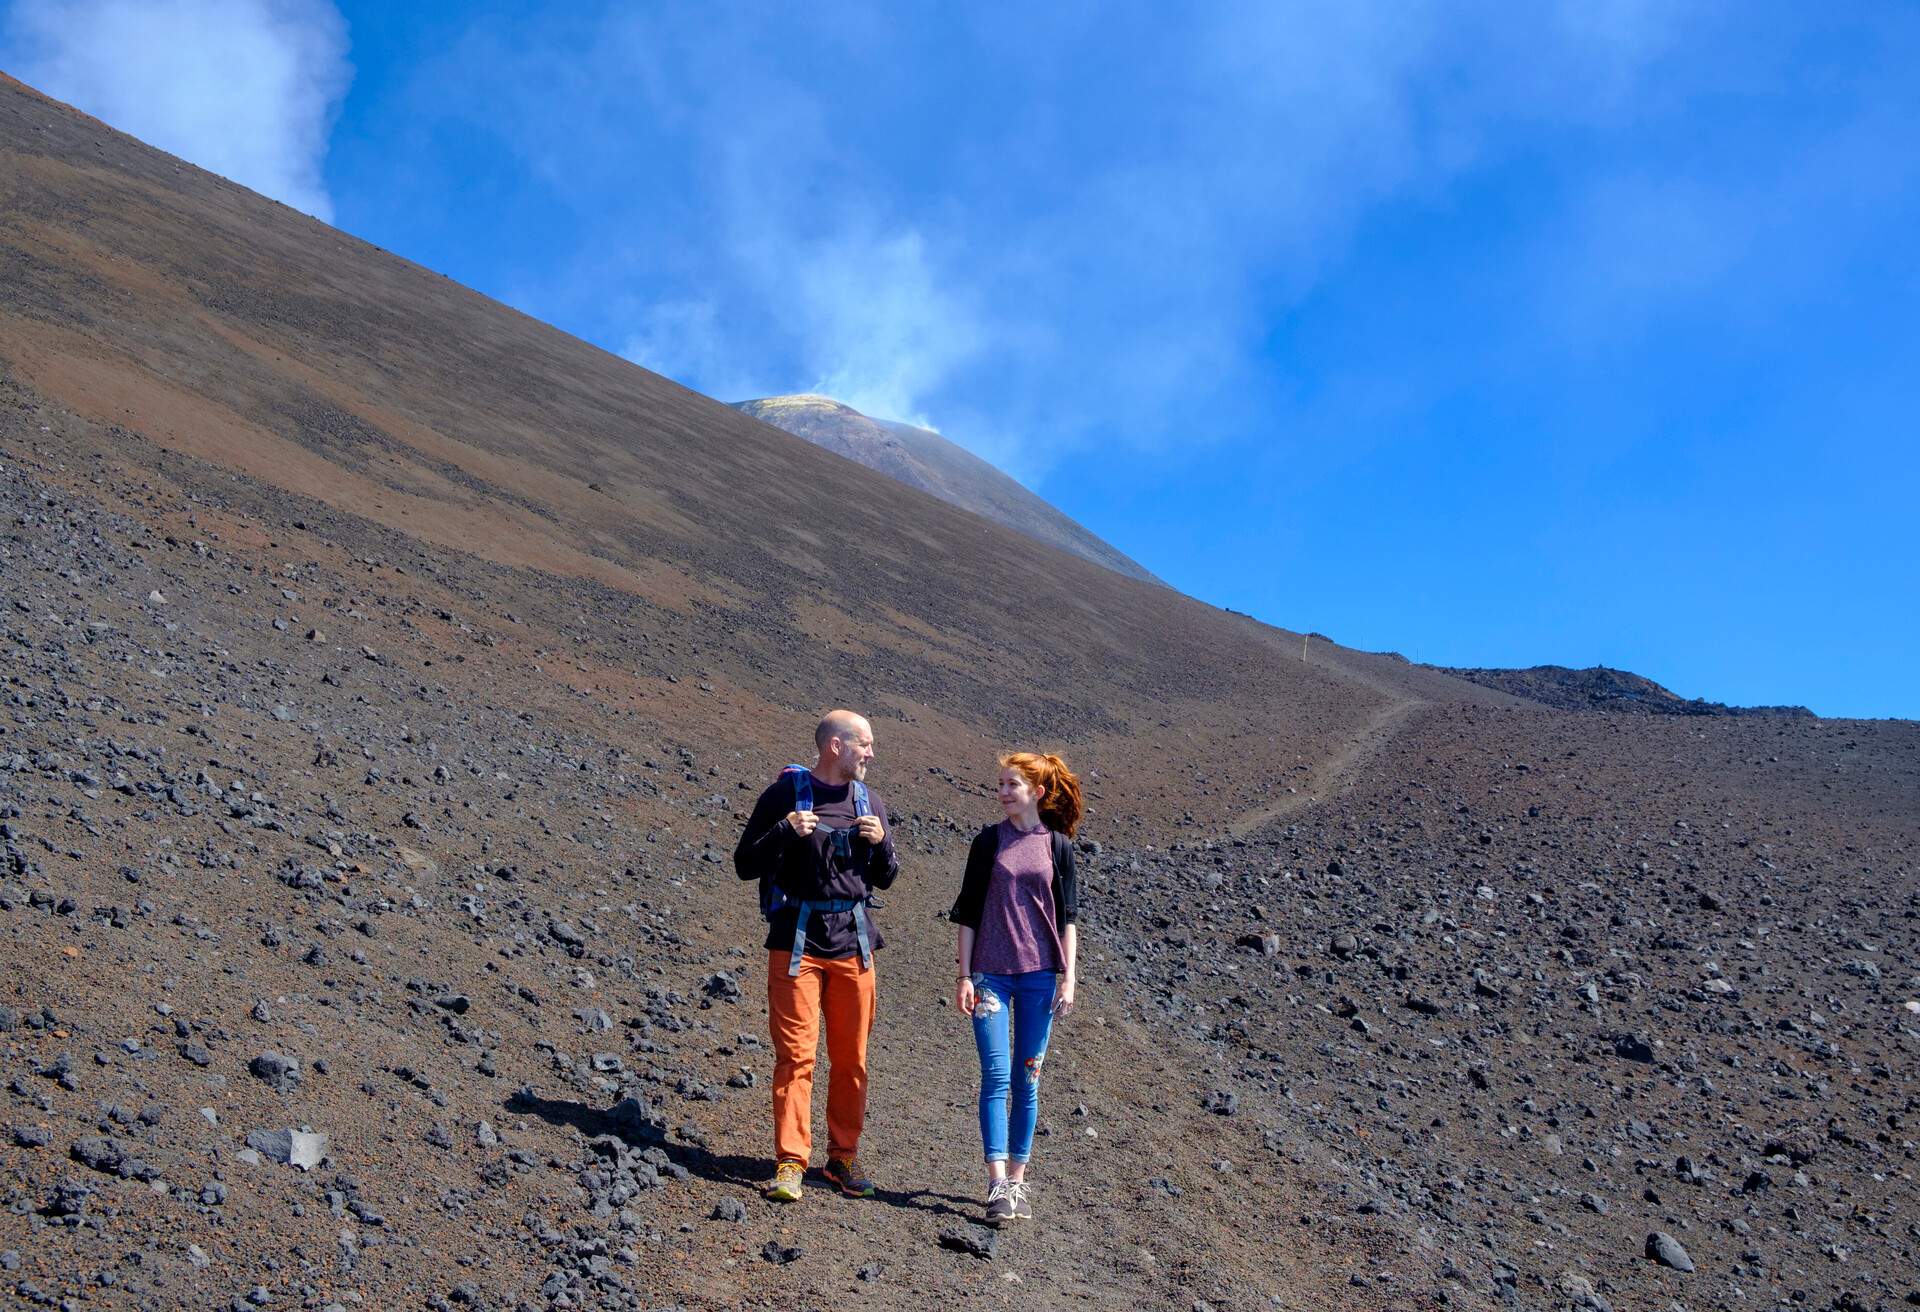 DEST_ITALY_SICILY_MOUNT-ETNA_THEME_HIKING_FAMILY_GettyImages-951525724